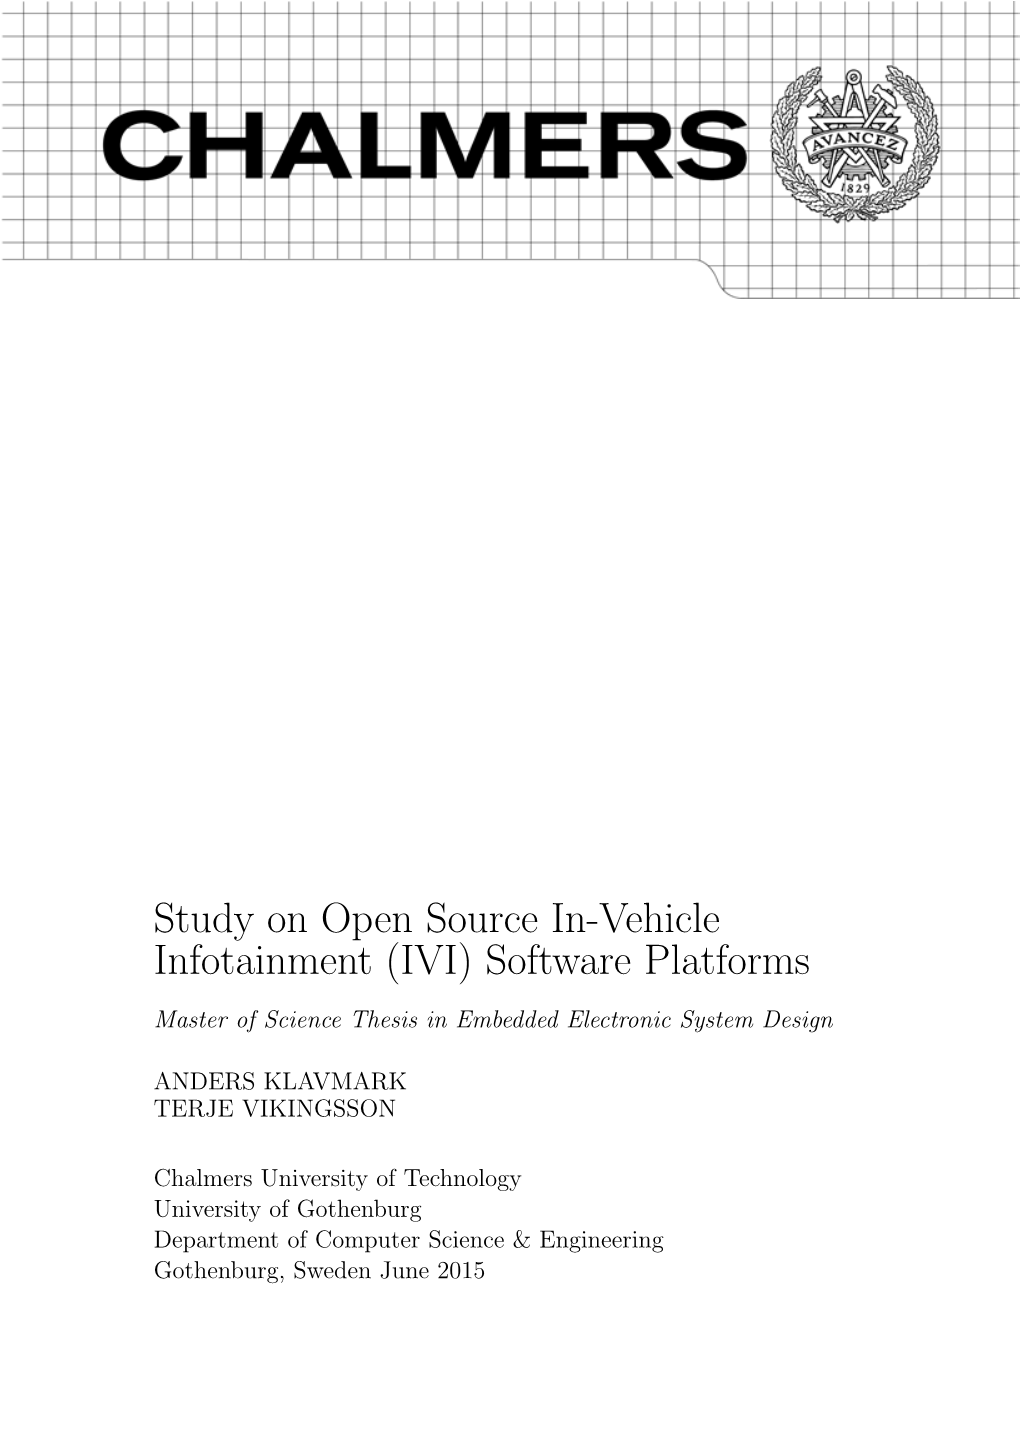 Study on Open Source In-Vehicle Infotainment (IVI) Software Platforms